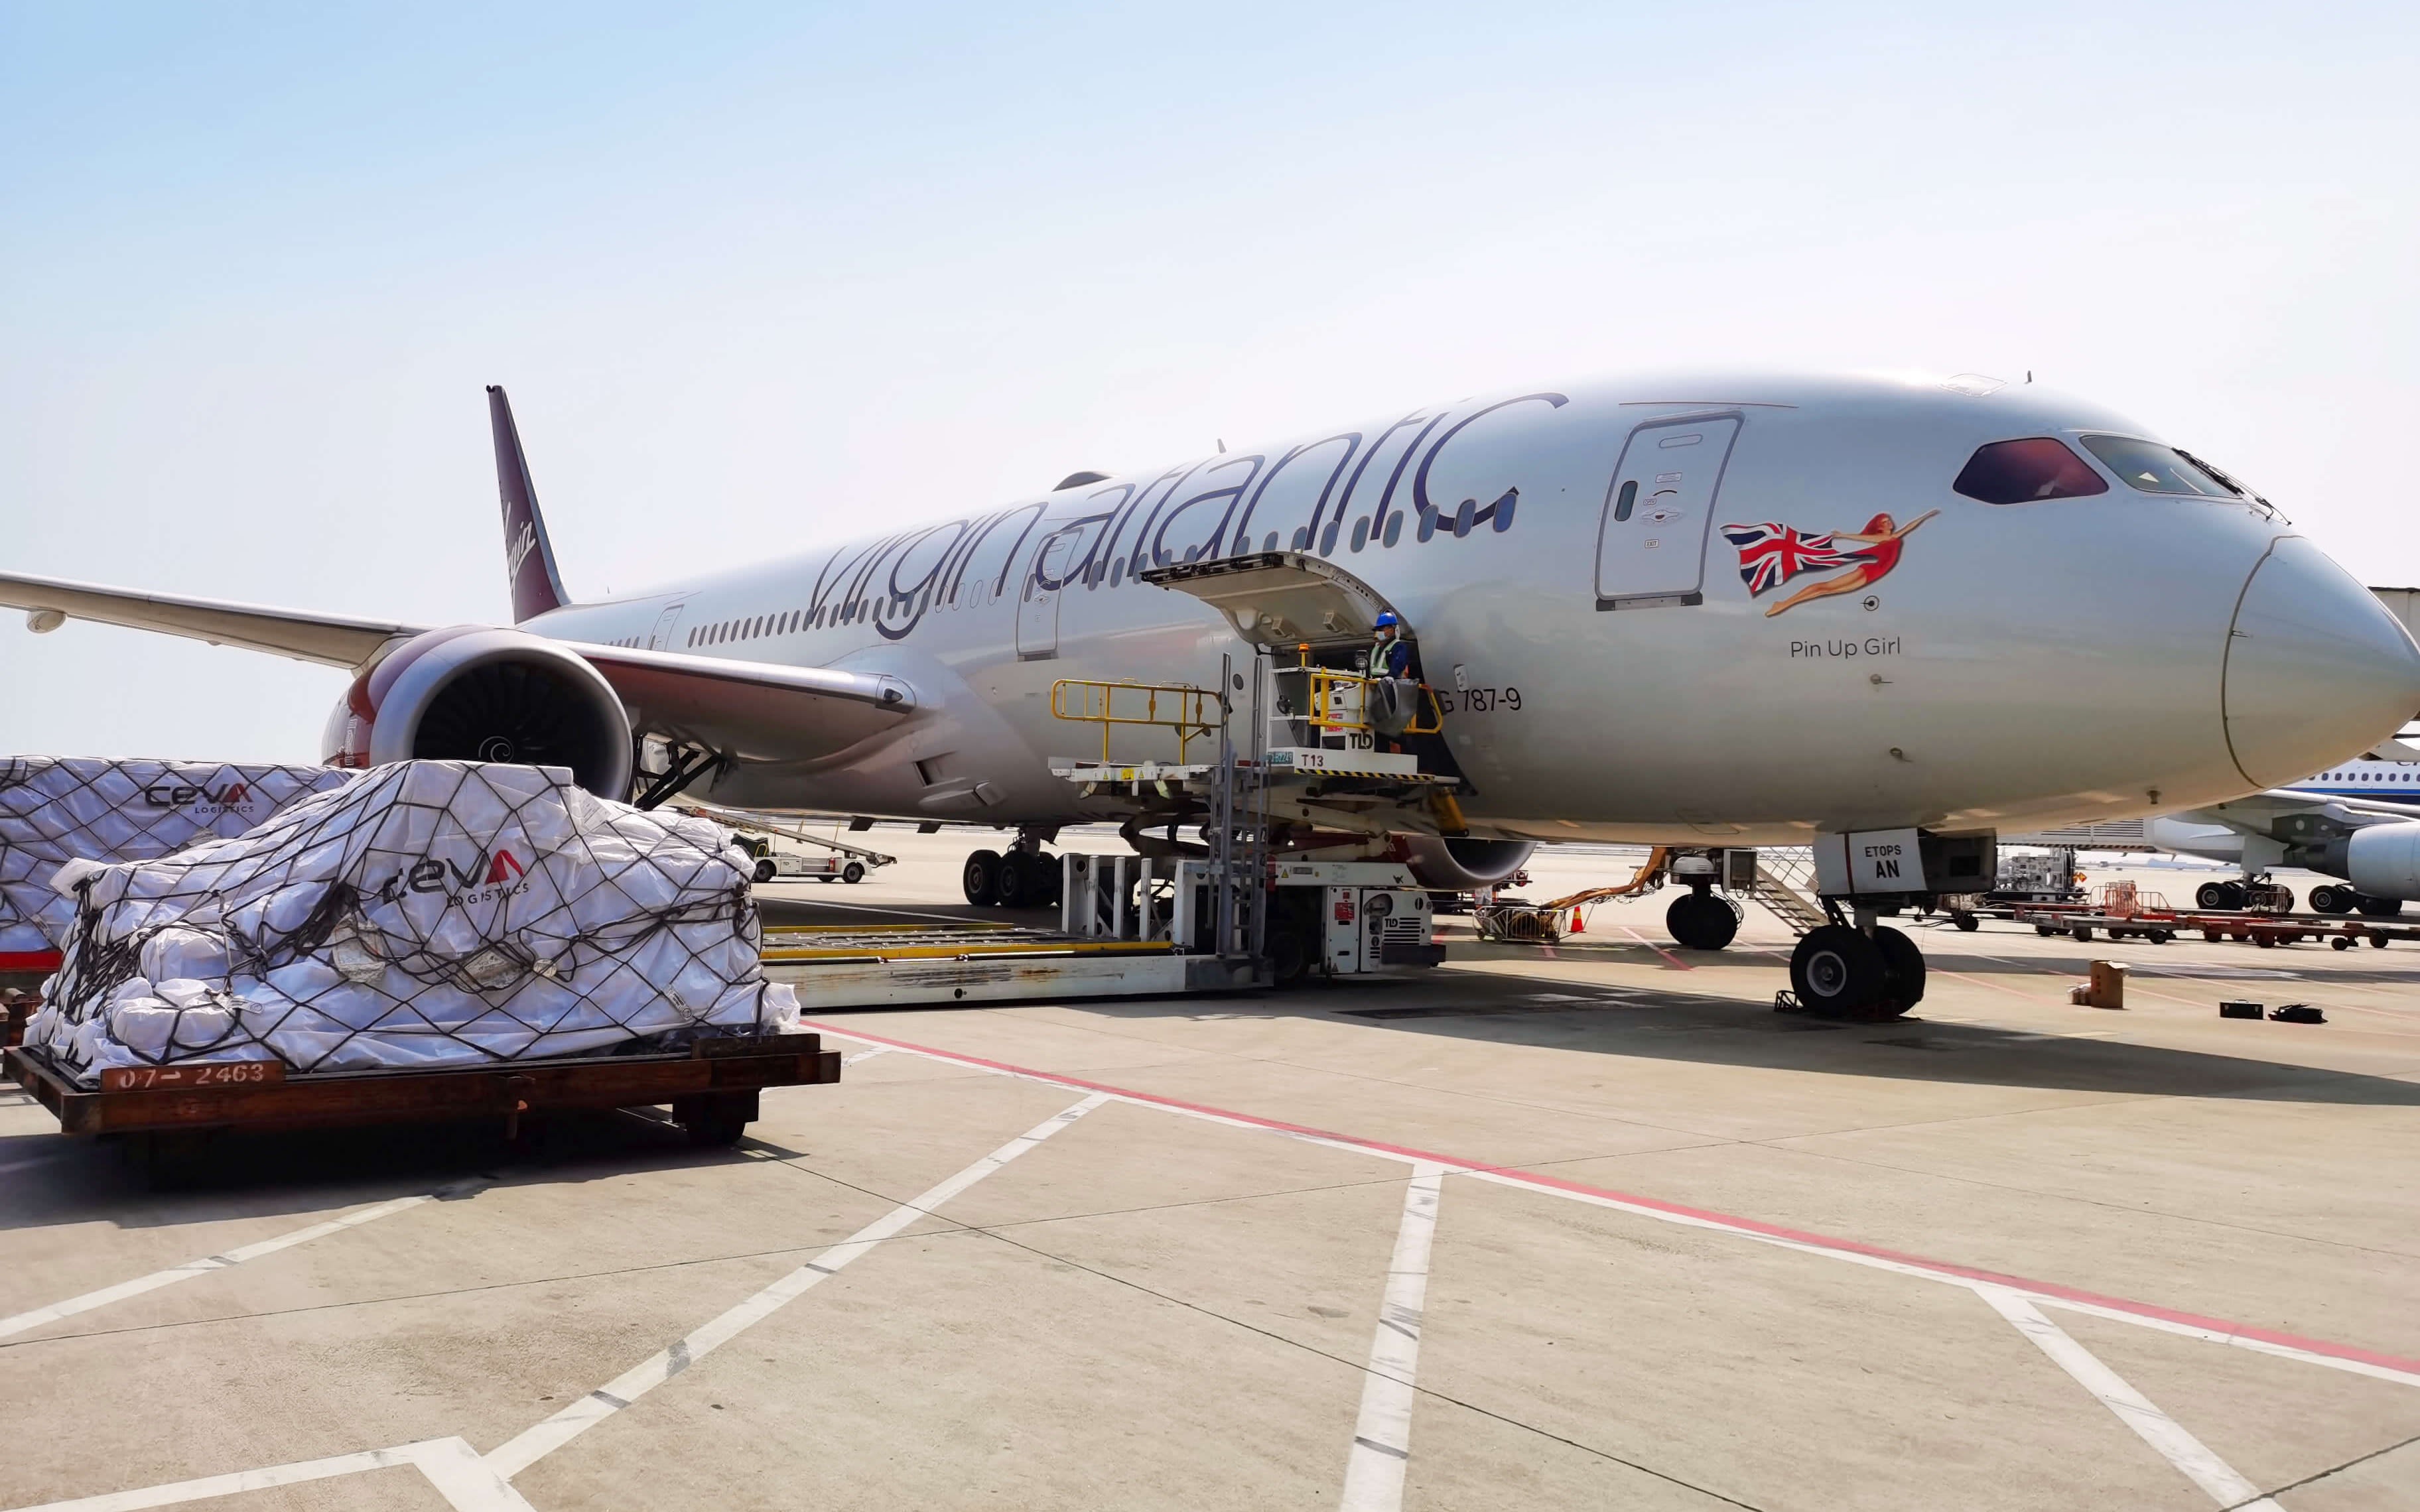 Medical supplies are loaded onto a Virgin Atlantic plane for a cargo flight